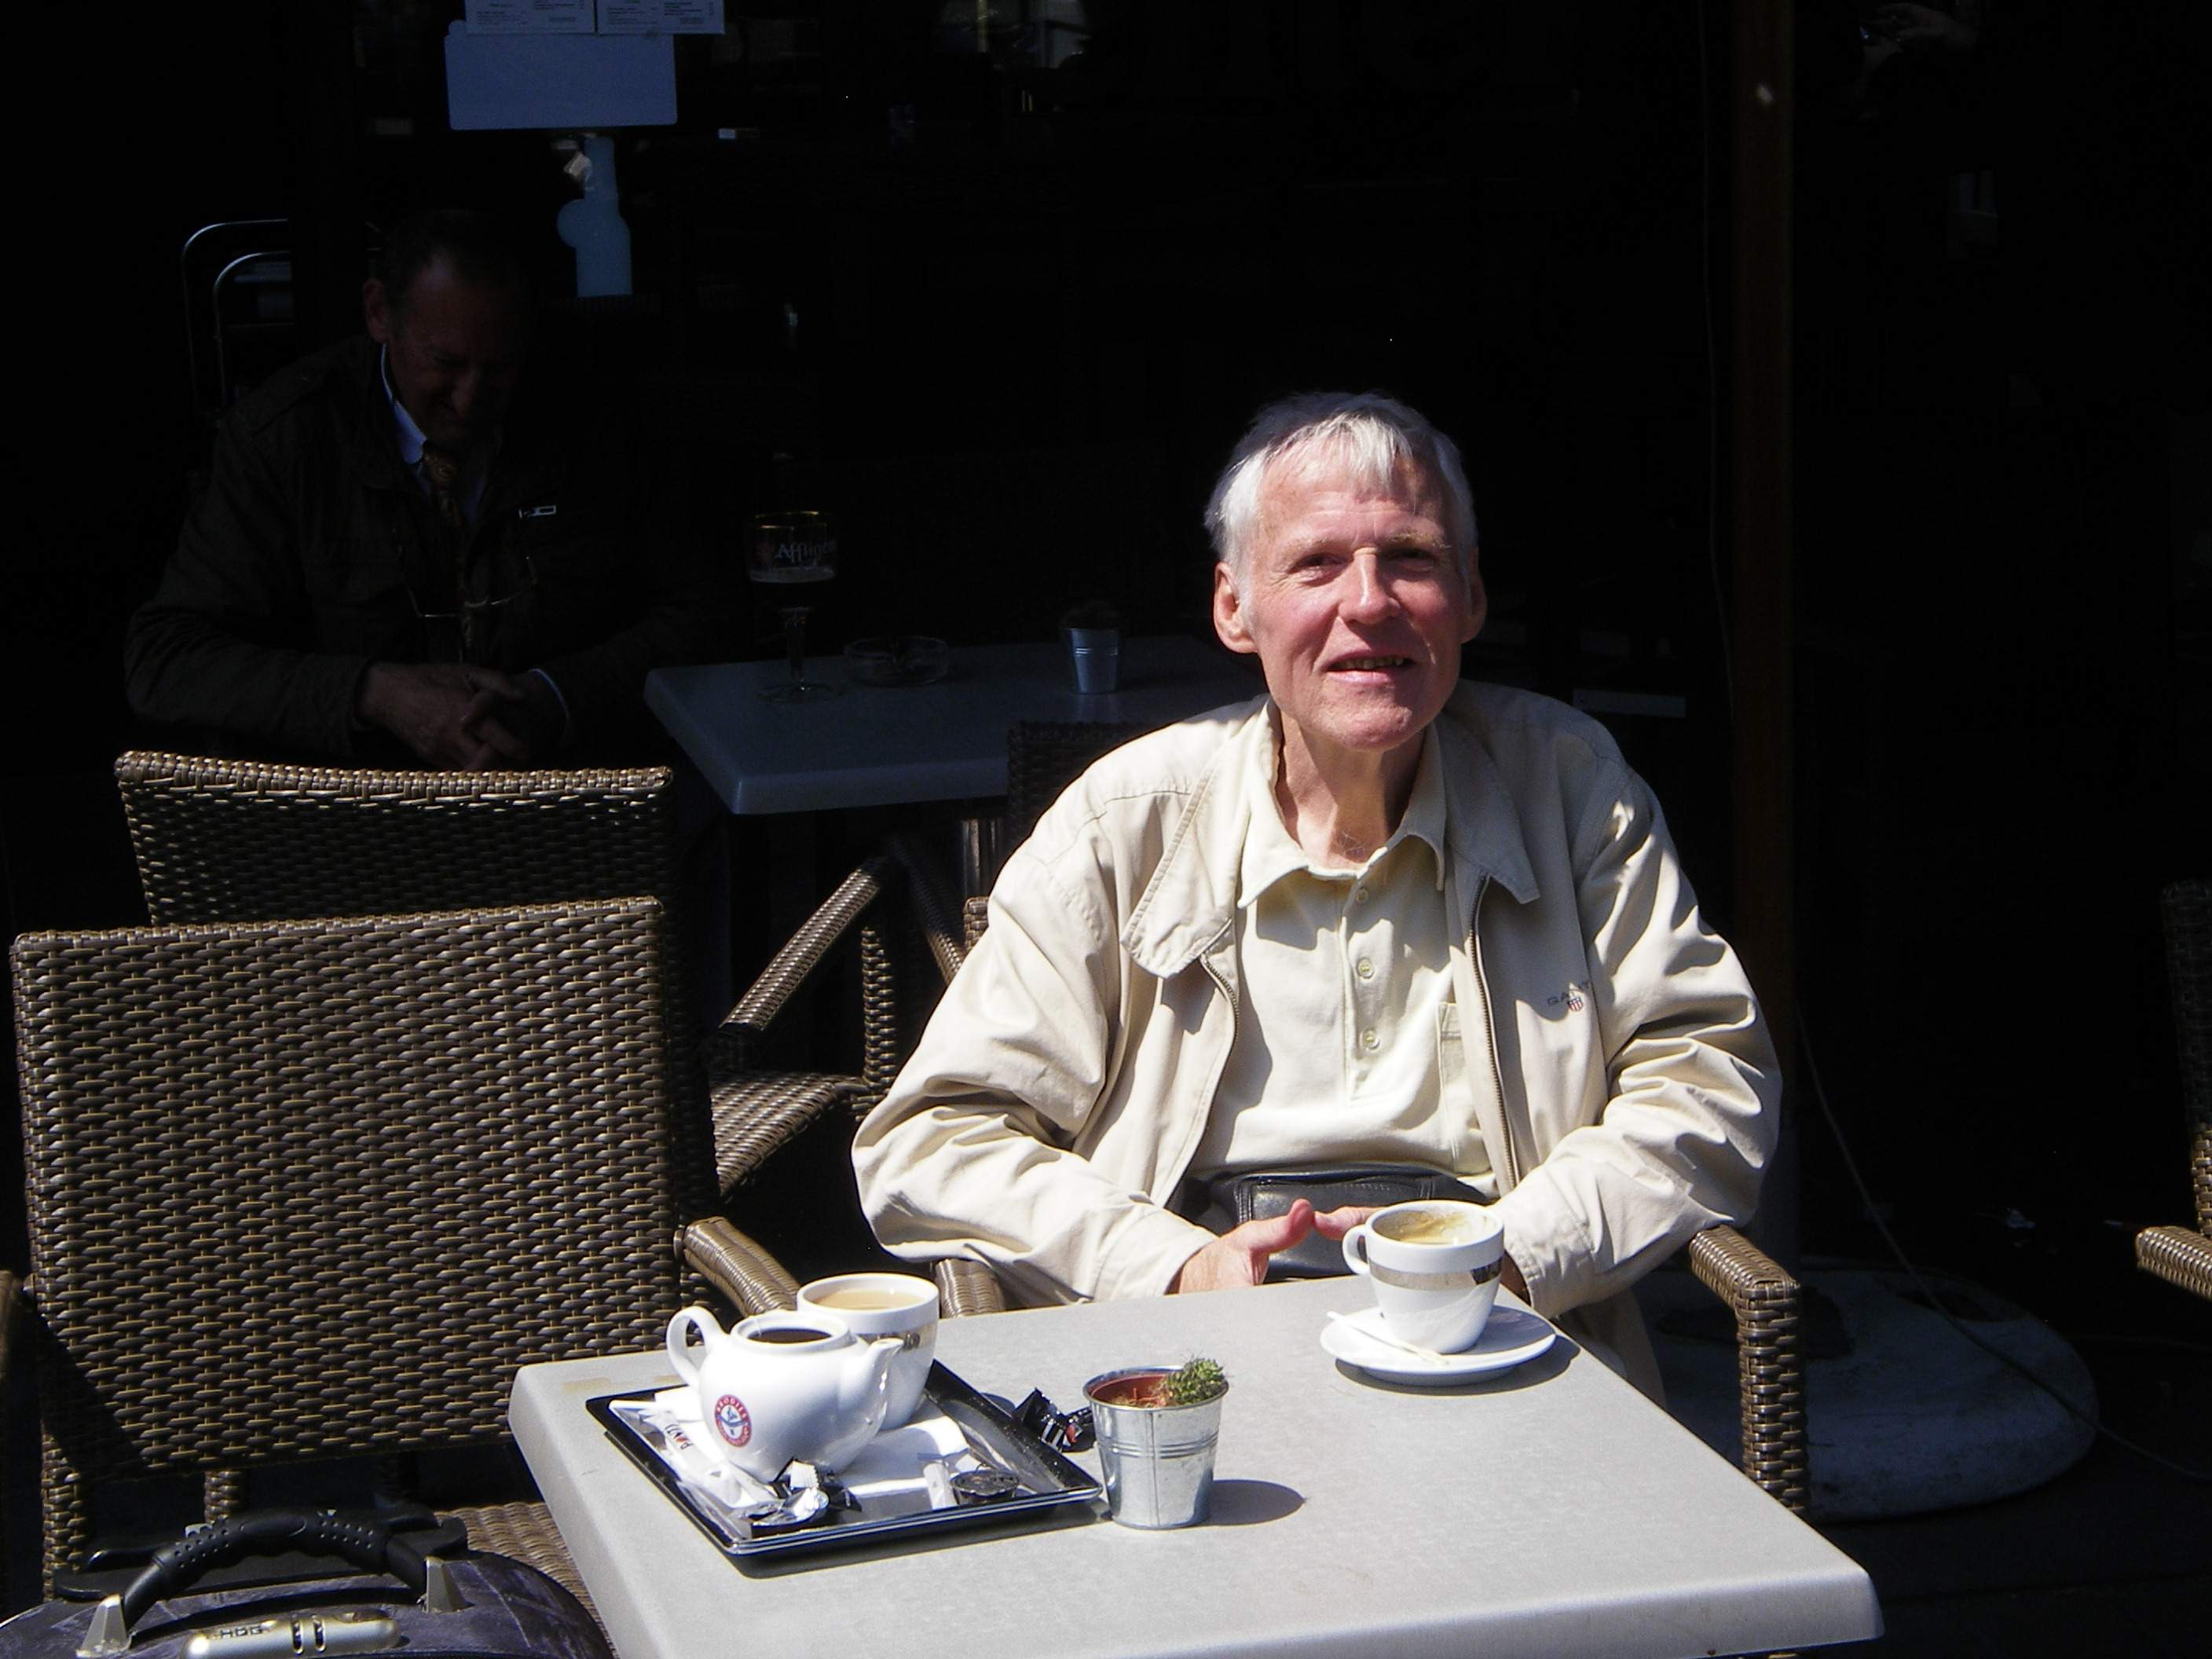 An elderly man sitting at a cafe table outdoors.